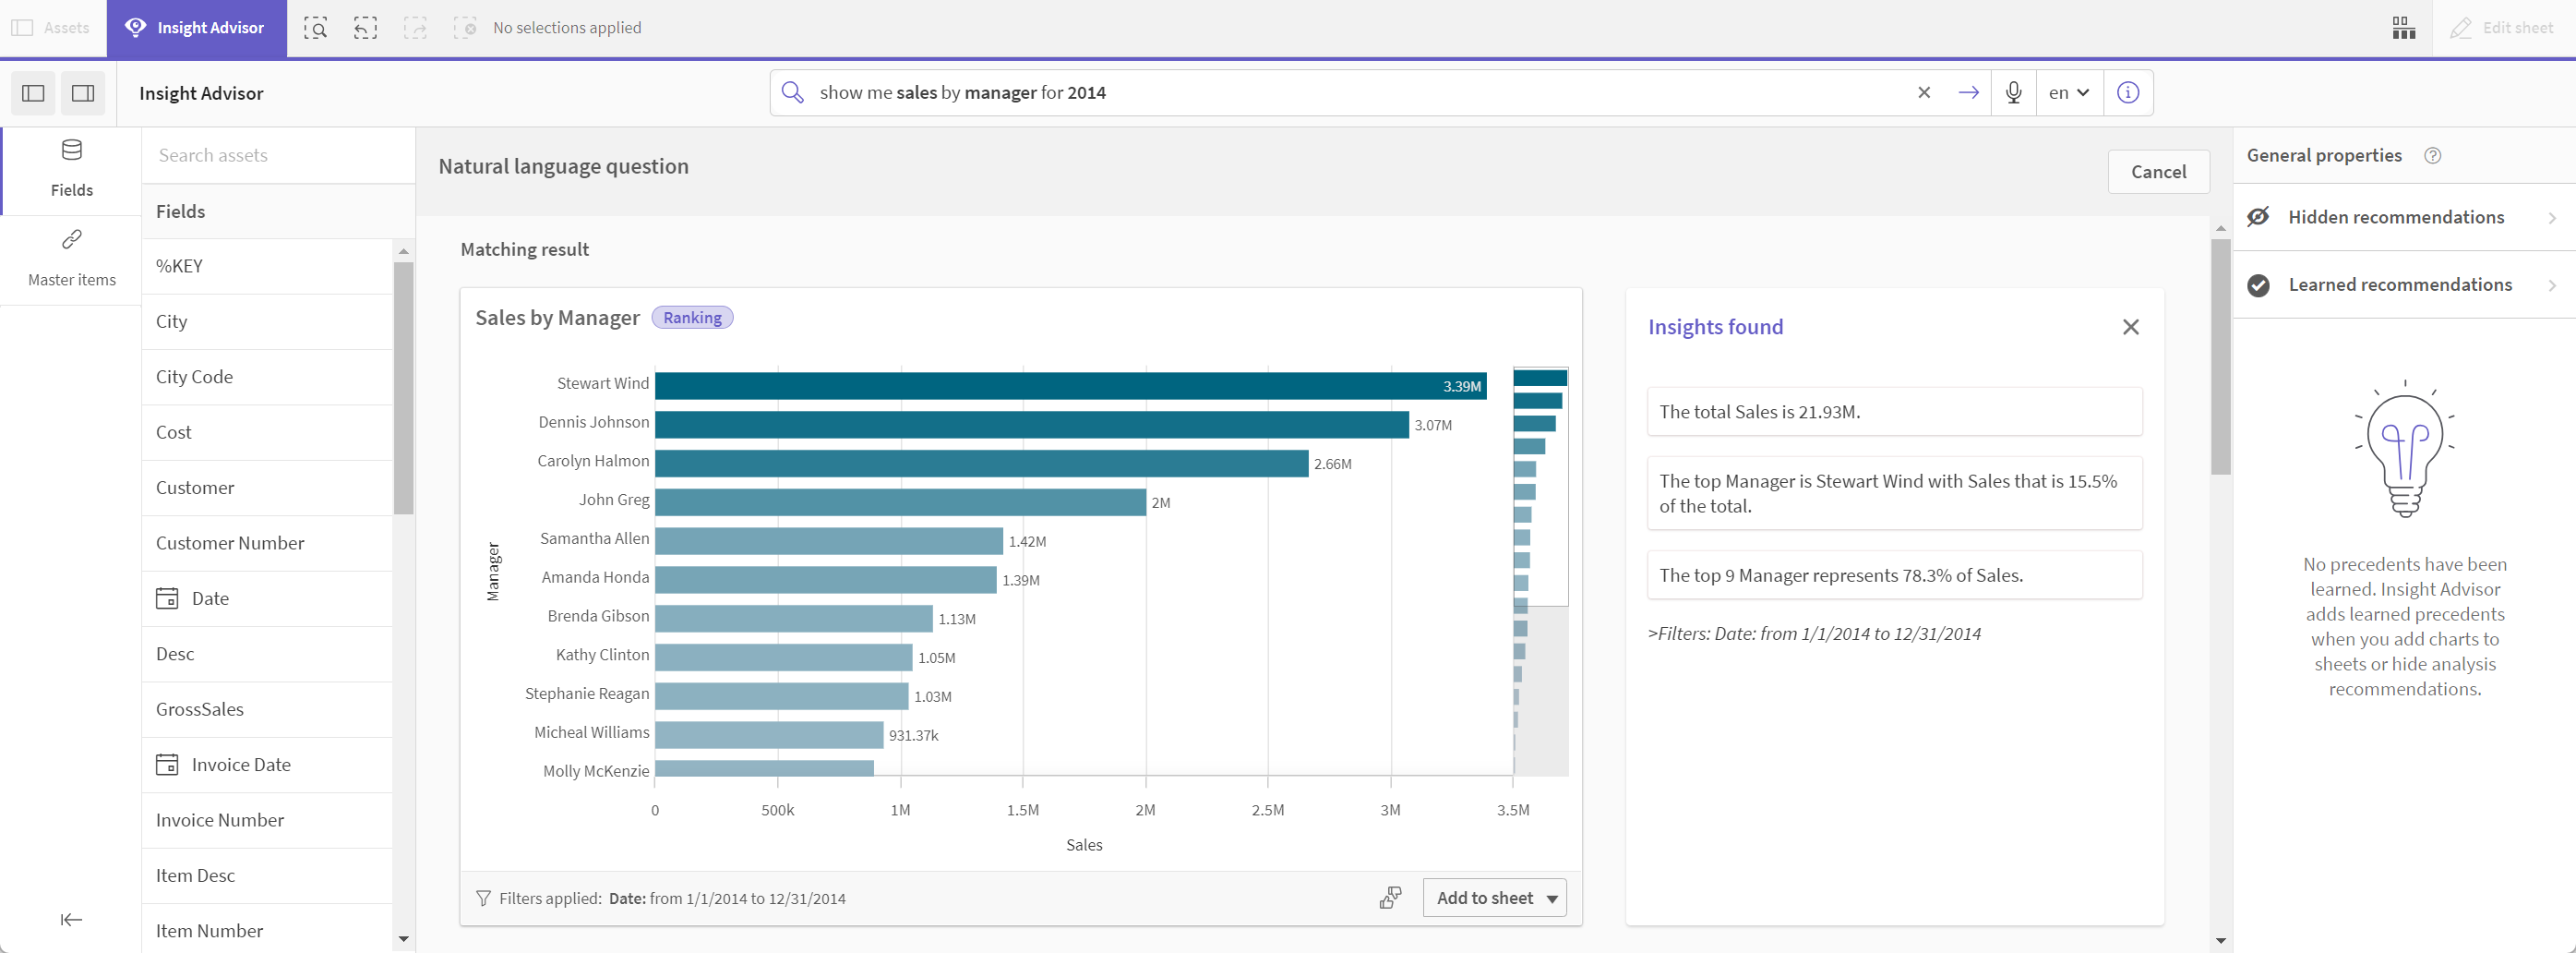 Matching result bar chart for query 'sum(Sales) by Customer' that includes three narrative insights in the section 'Insights found'. The narrative insights are 'The total Sales is 21.9M', 'The top manager is Stewart Wind with Sales that is 15.5% of the total', and 'The top 9 Manager represents 78.3% of Sales'.